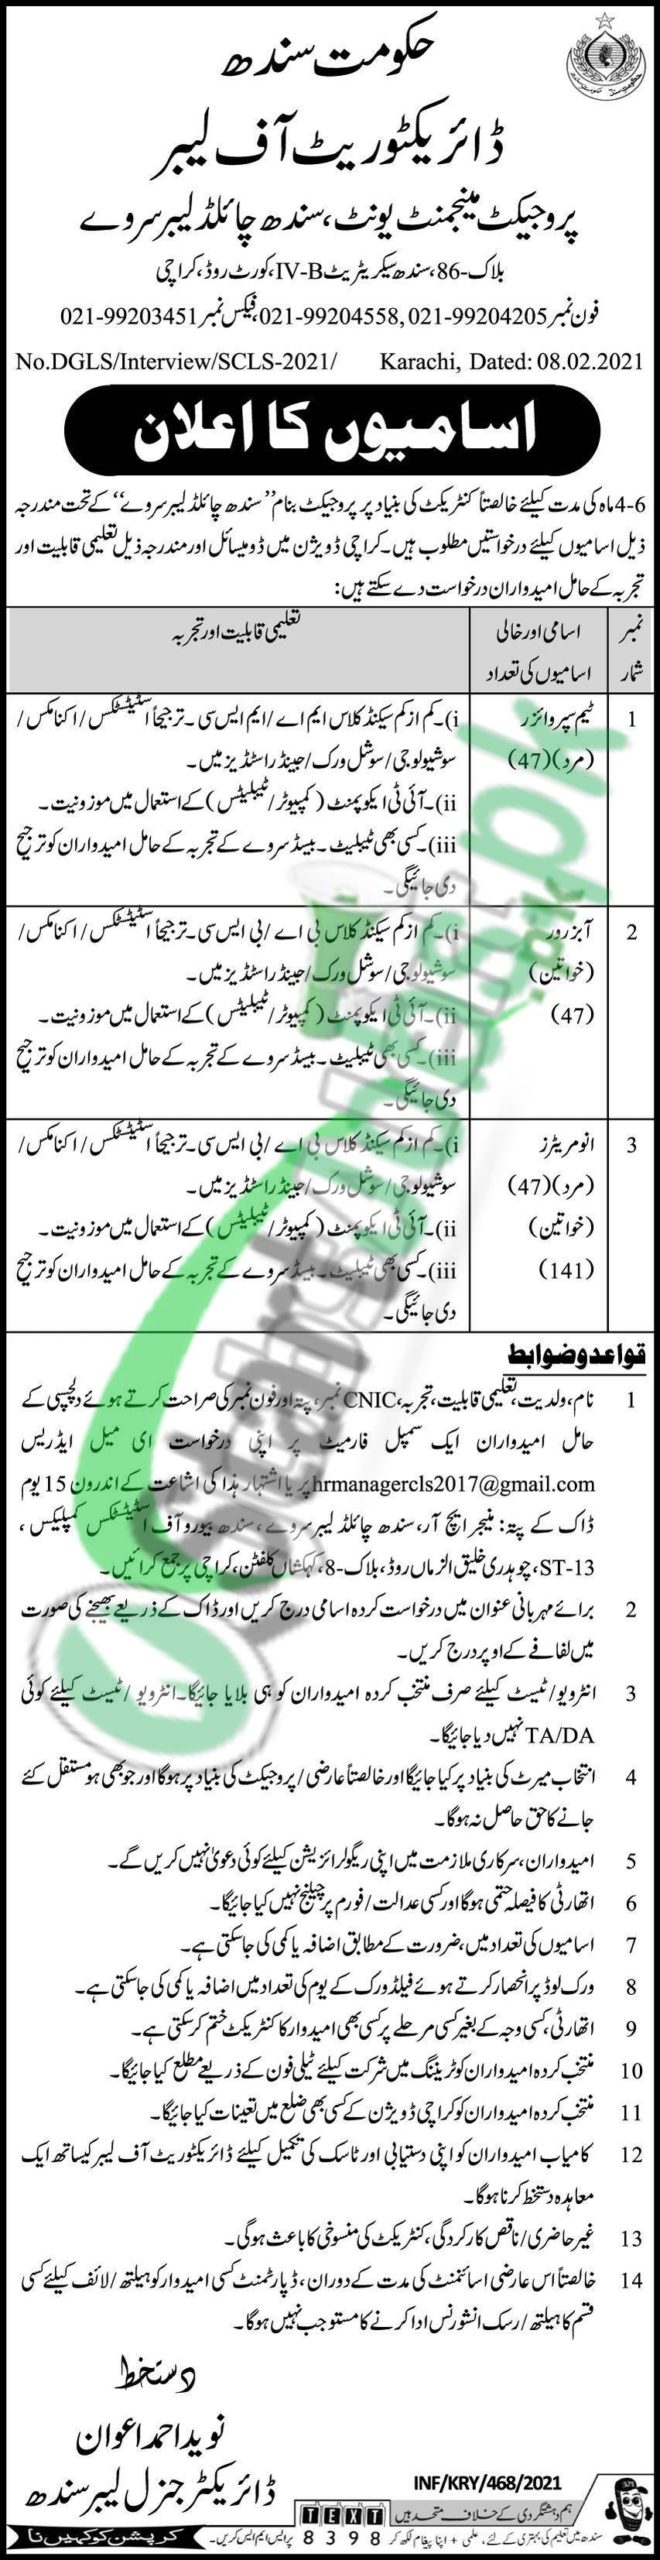 Directorate of Labour Government Of Sindh Jobs 2021 Enumerator & Supervisor